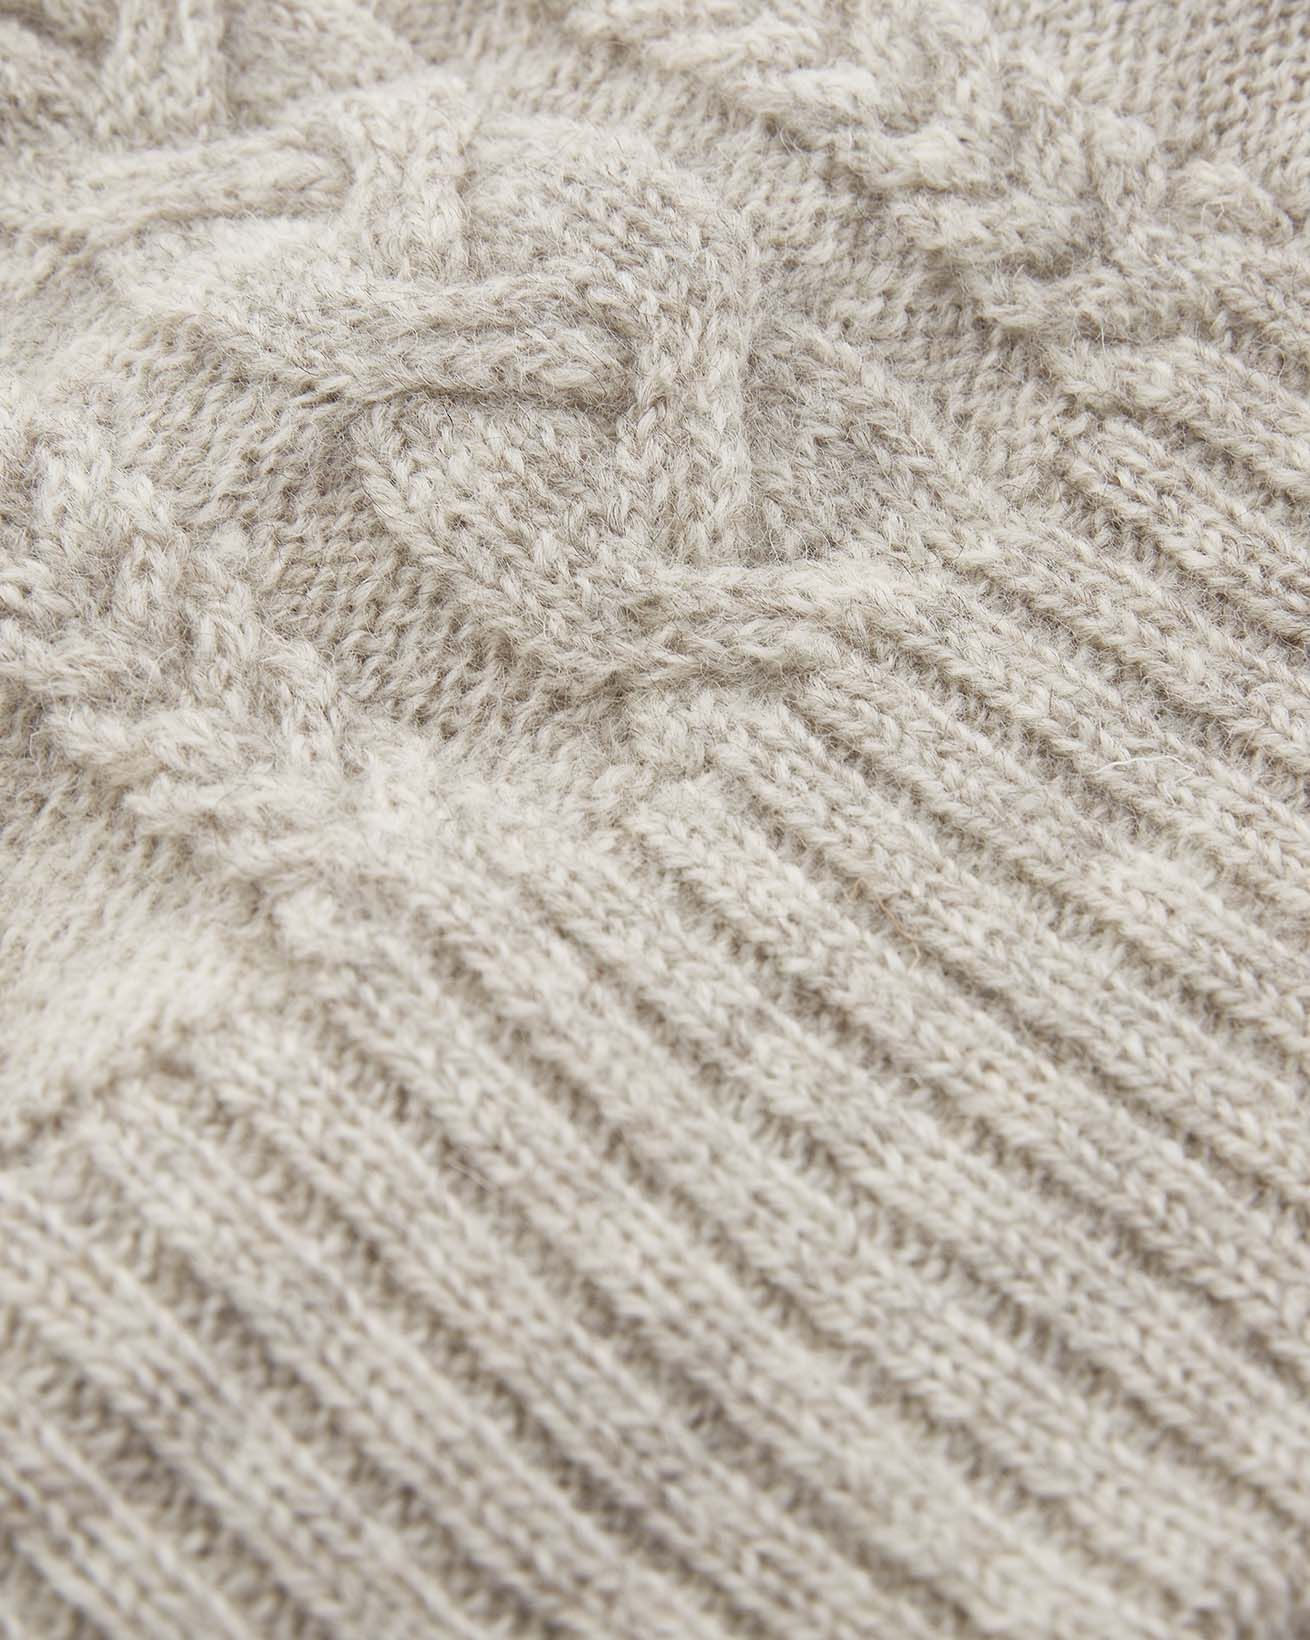 8204_british-wool-cable-zip-cardigan_undyed-taupe_detail-5_web.jpg